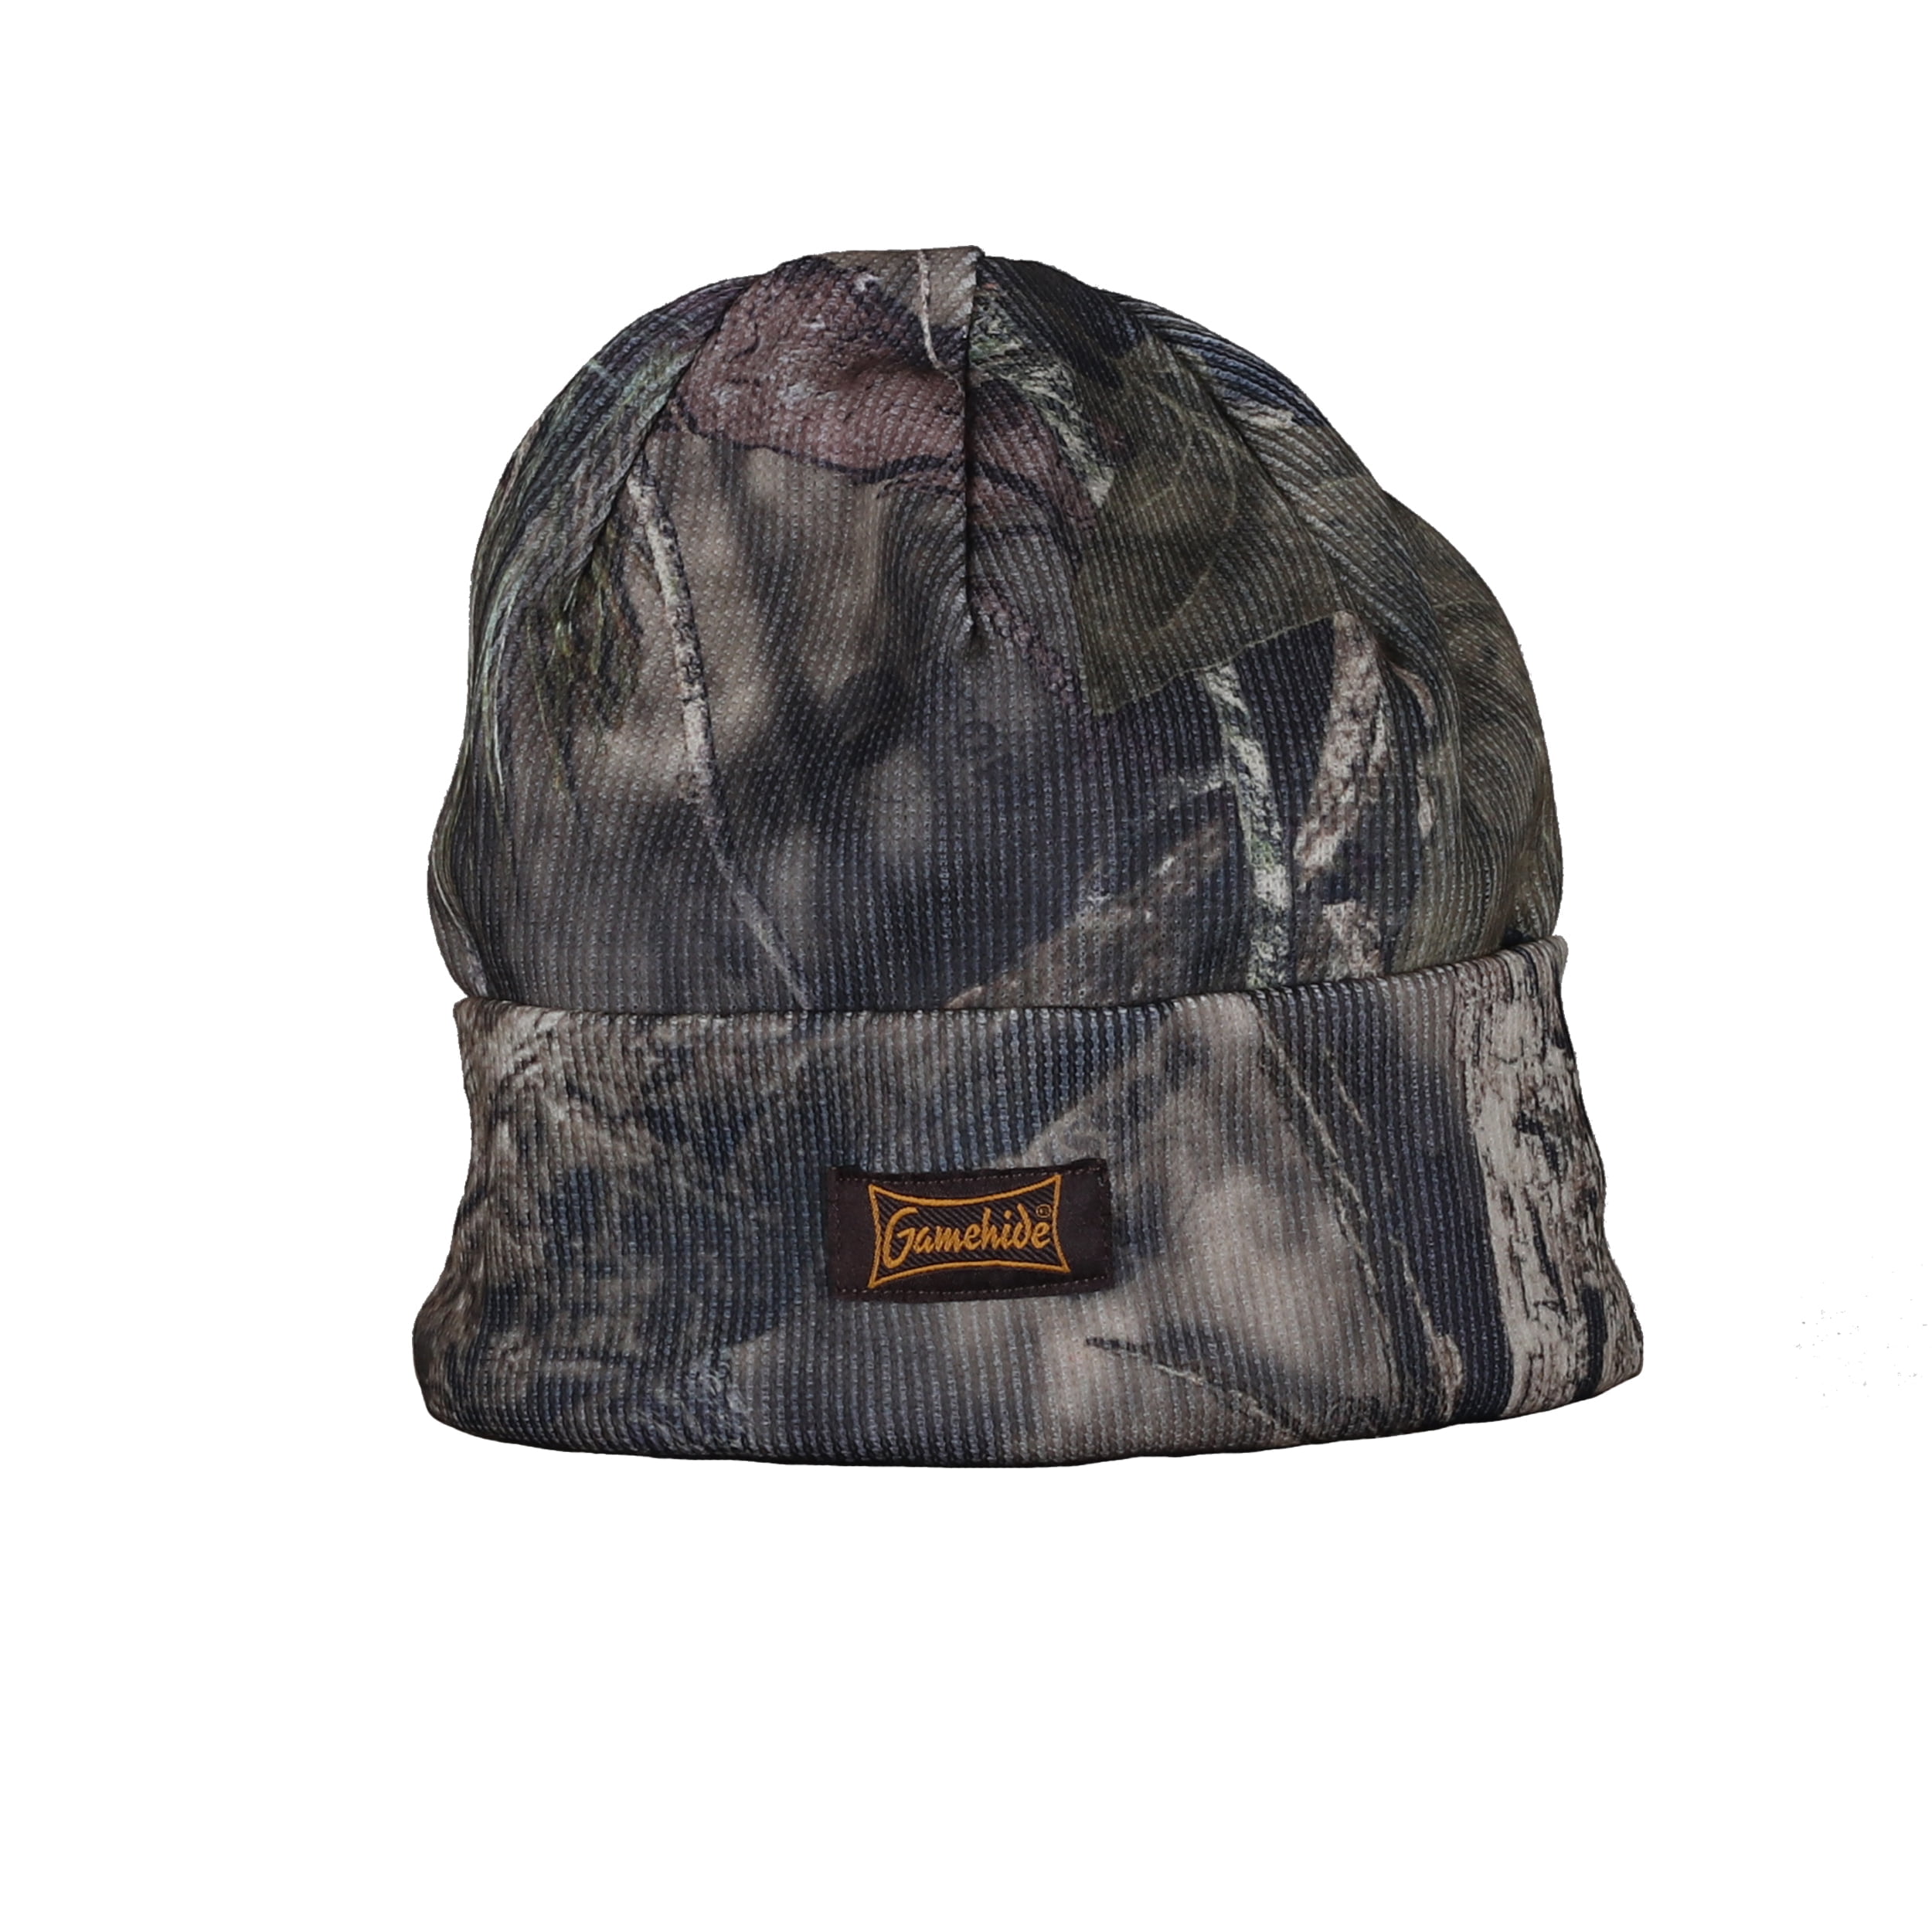 Gamehide Insulated and Waterproof Realtree Edge Hunting Hat 